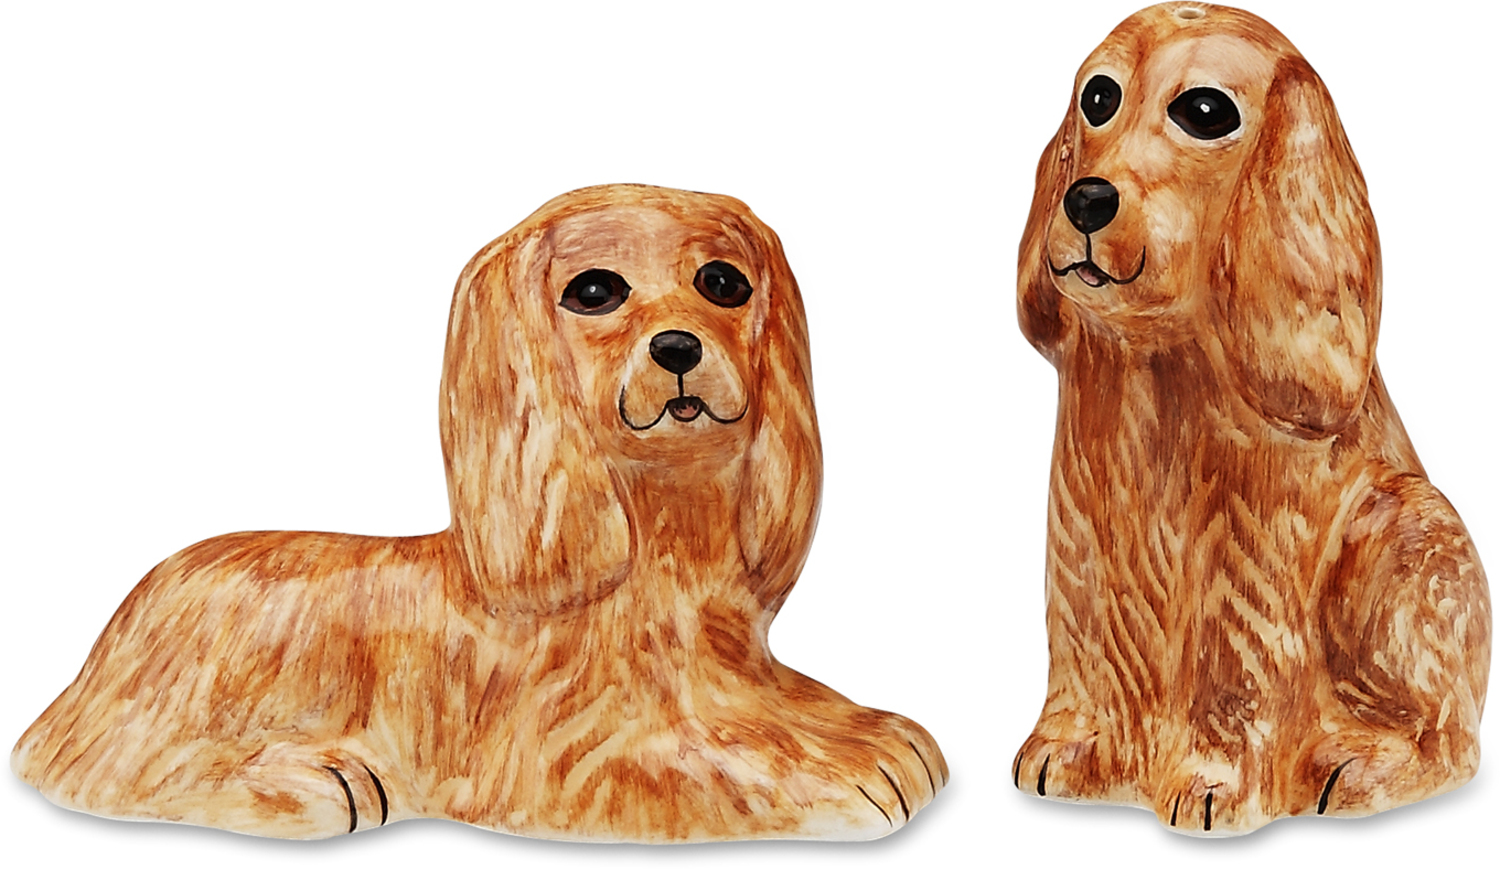 Tanner & Mitzi- Cocker Span by Rescue Me Now - Tanner & Mitzi- Cocker Span - 3.25" Dog Salt & Pepper Shaker Set